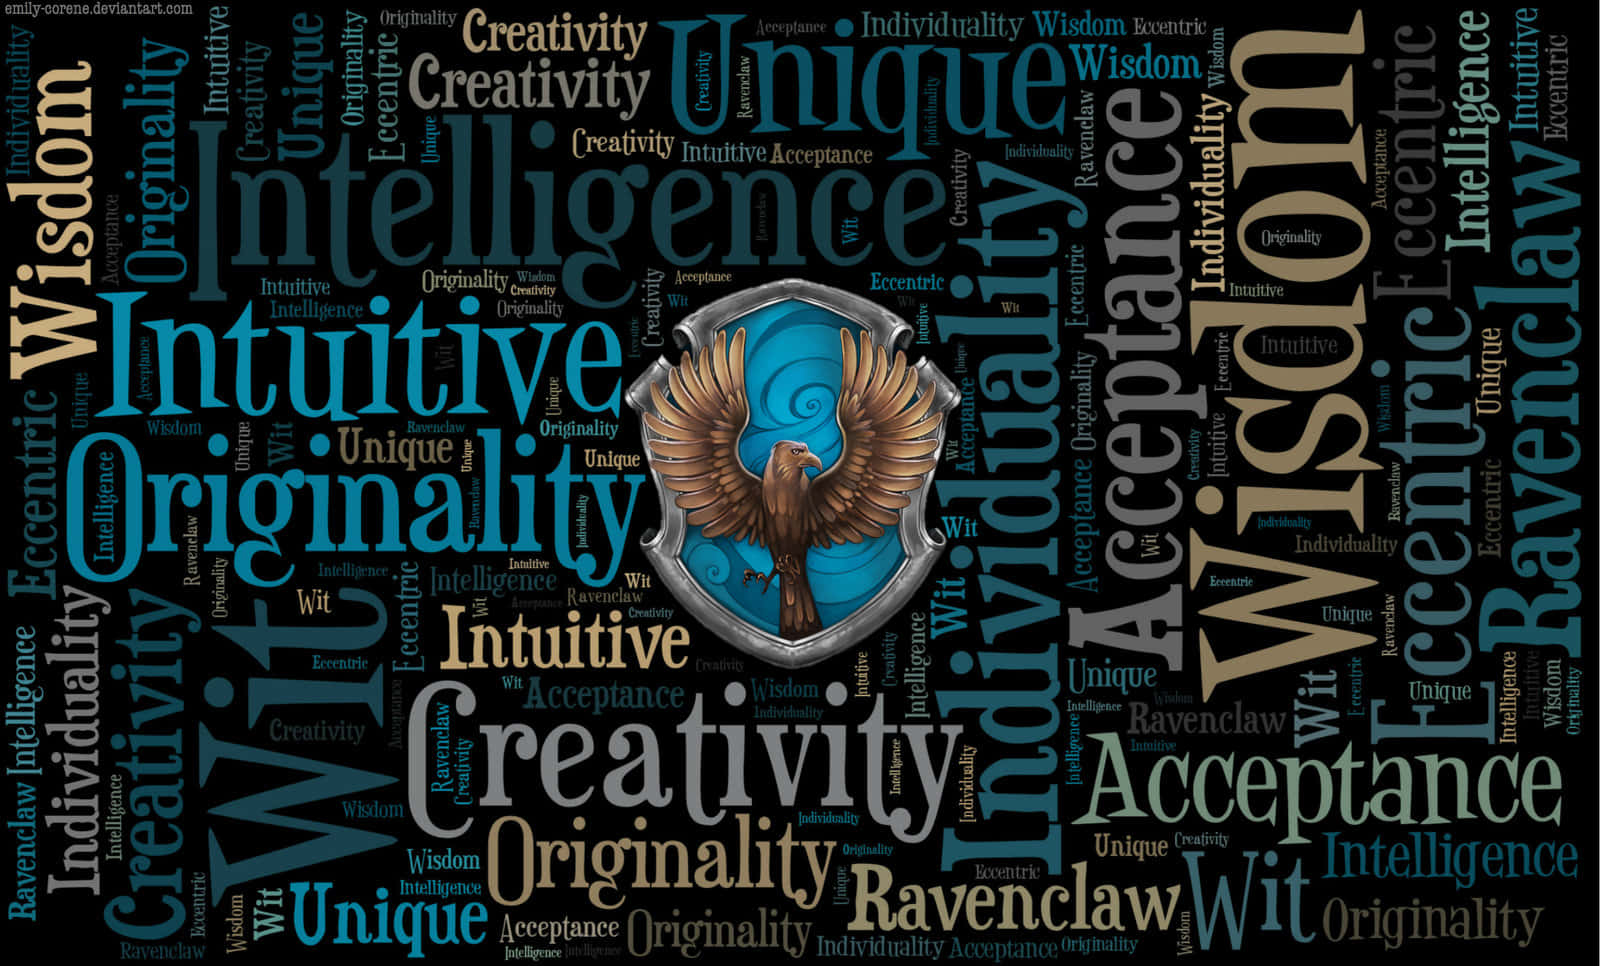 Download A Representation Of The Hogwarts House Of Ravenclaw